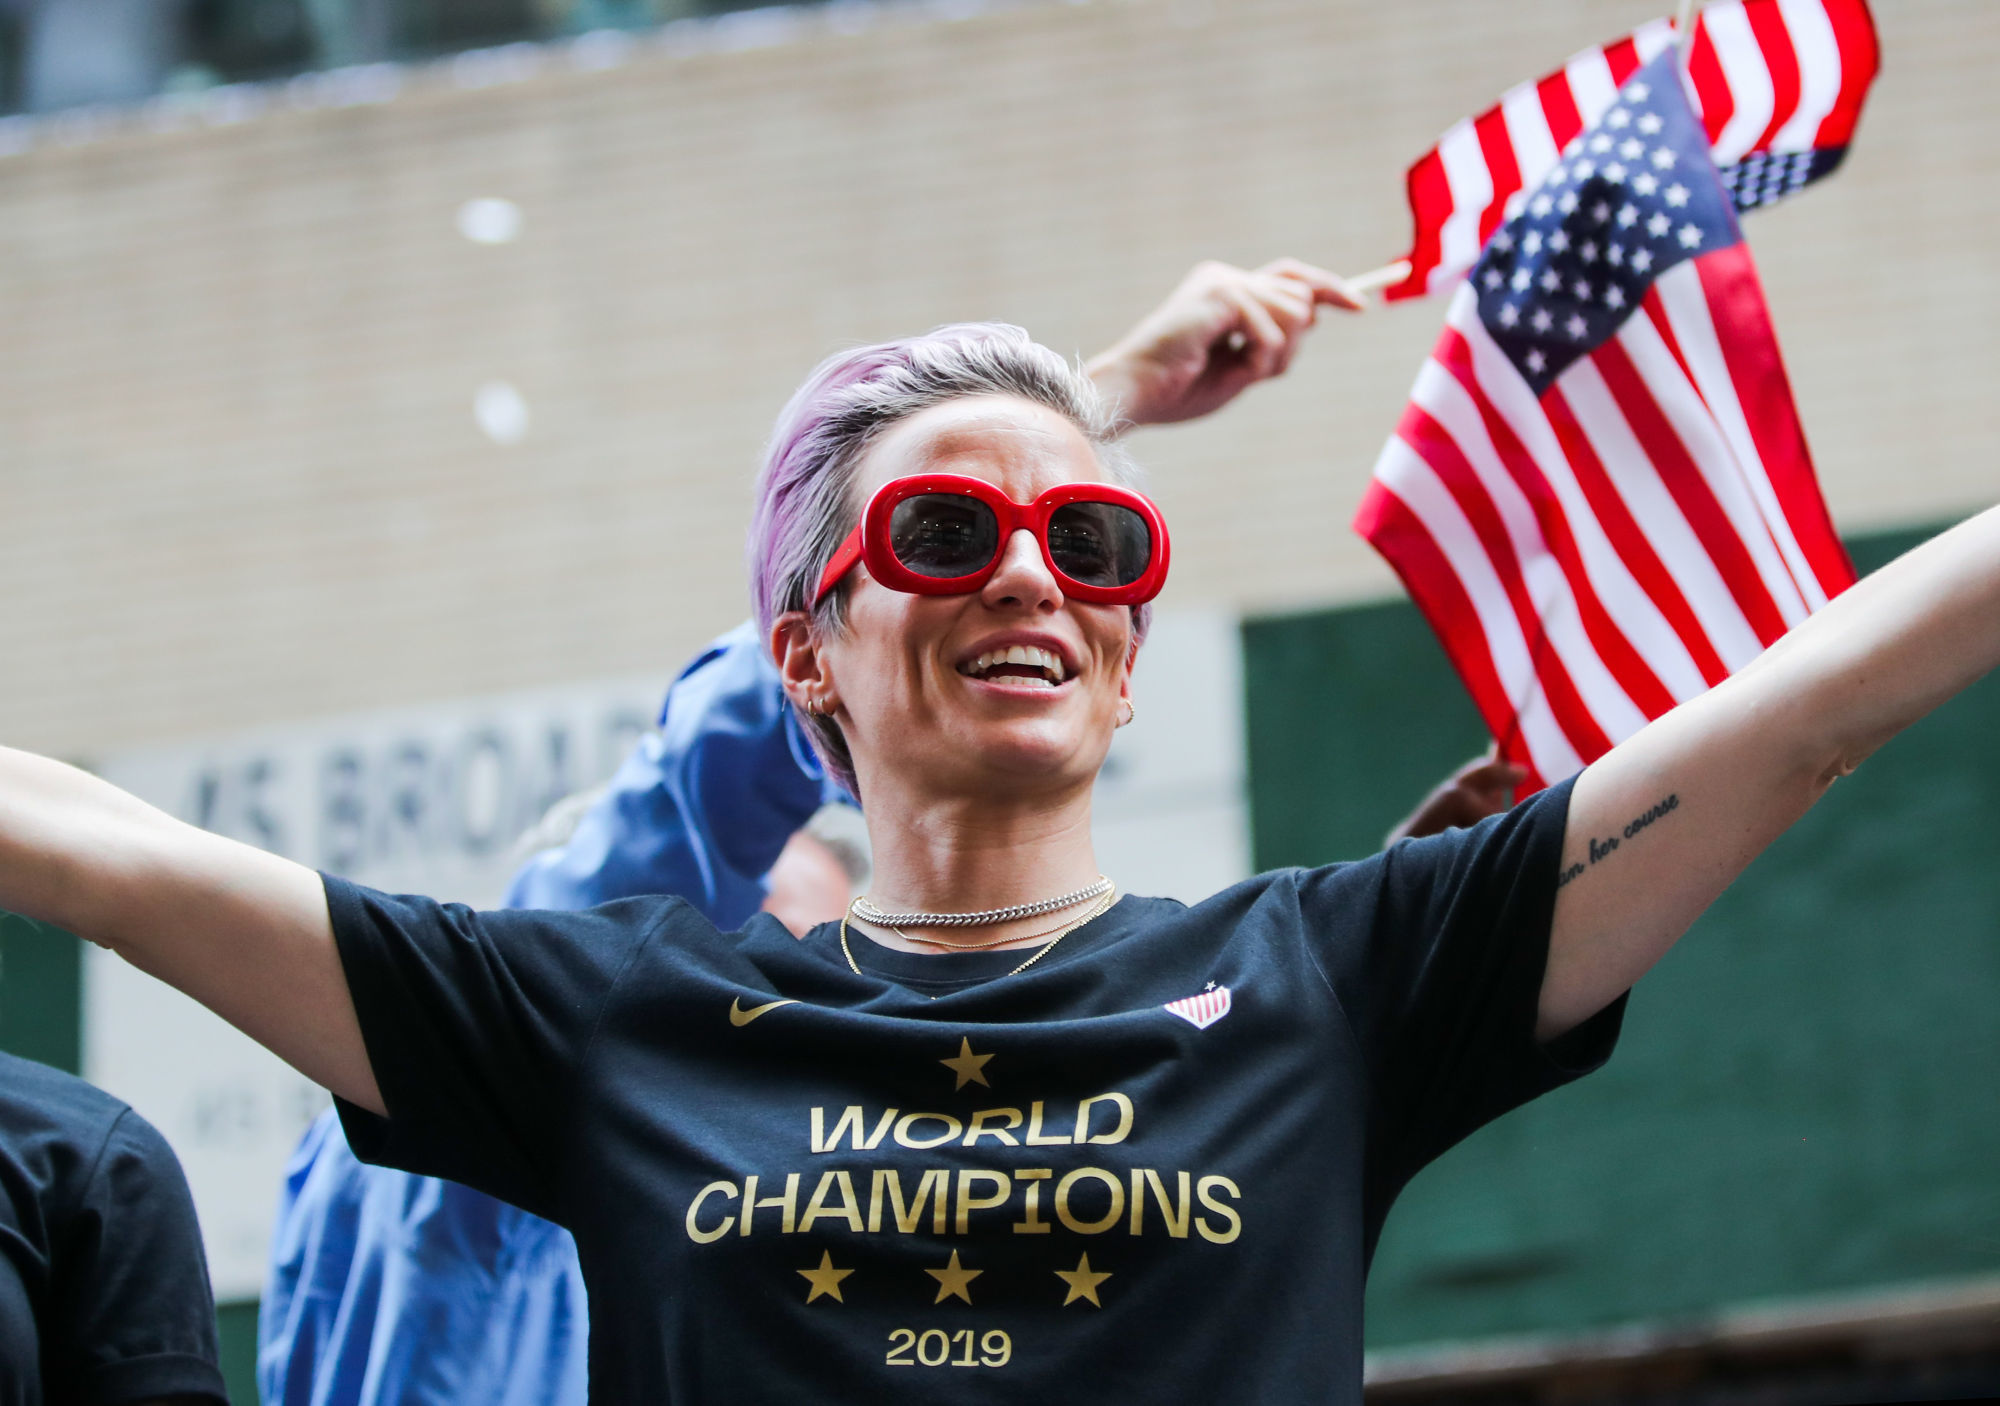 U.S. women's soccer team member Megan Rapinoe celebrates during the ticker-tape parade for World Cup-winning United States women's soccer team in New York, the United States, July 10, 2019.
Photo : SUSA / Icon Sport